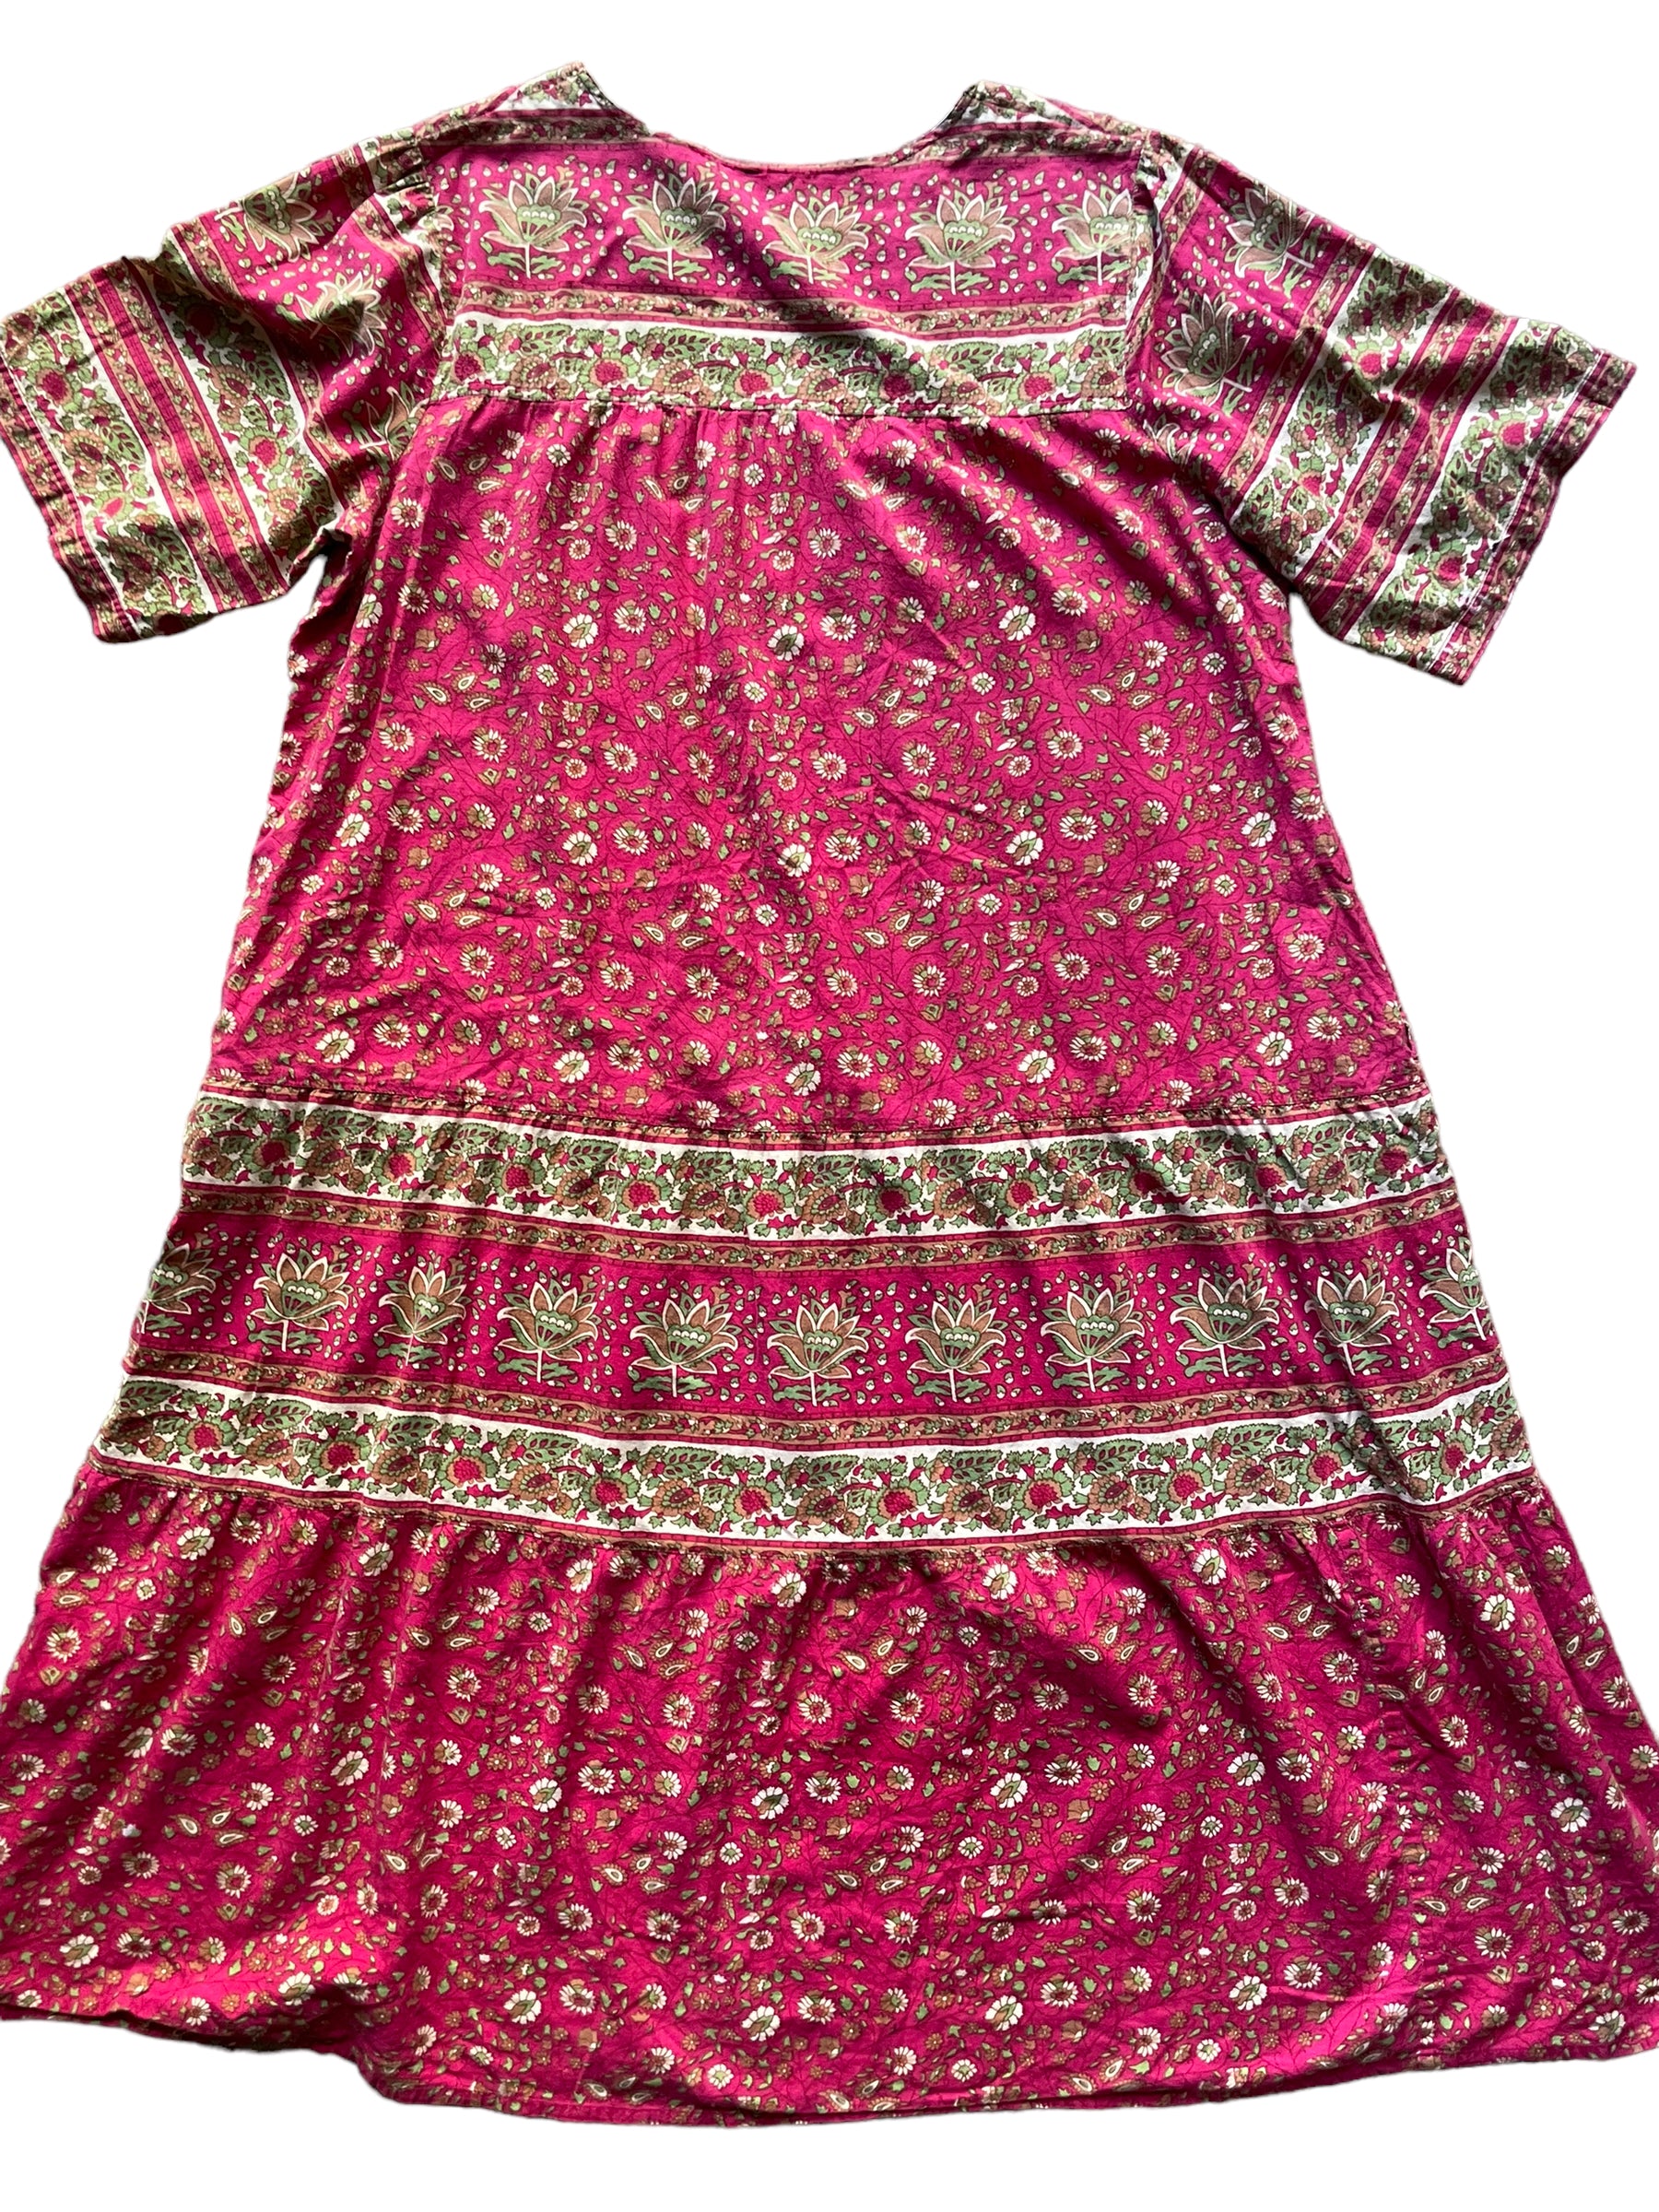 Full back view of Vintage 1970s Indian Cotton Dress Sz XL